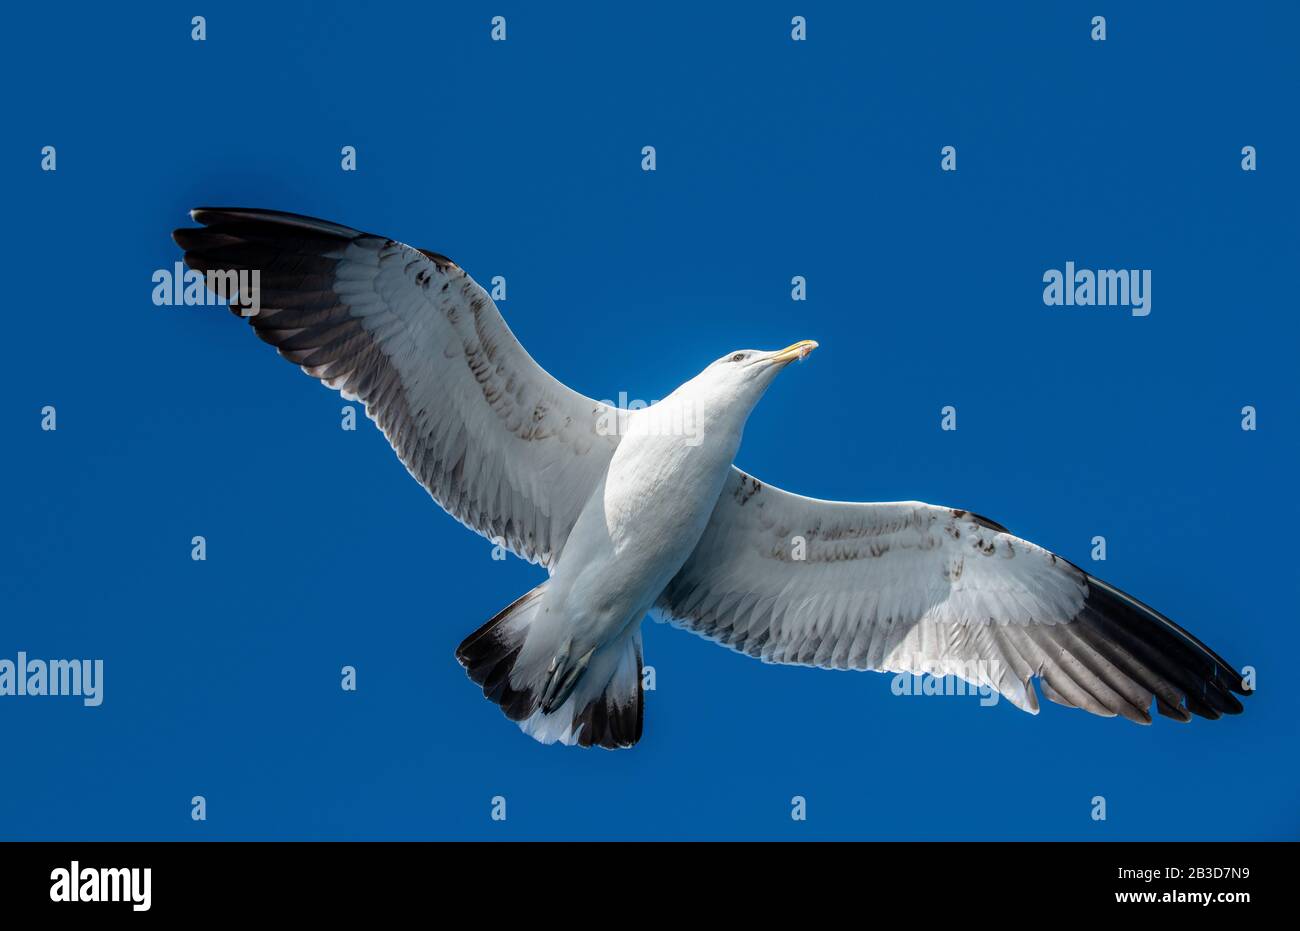 Seagull in flight on blue sky background, view from below. Stock Photo